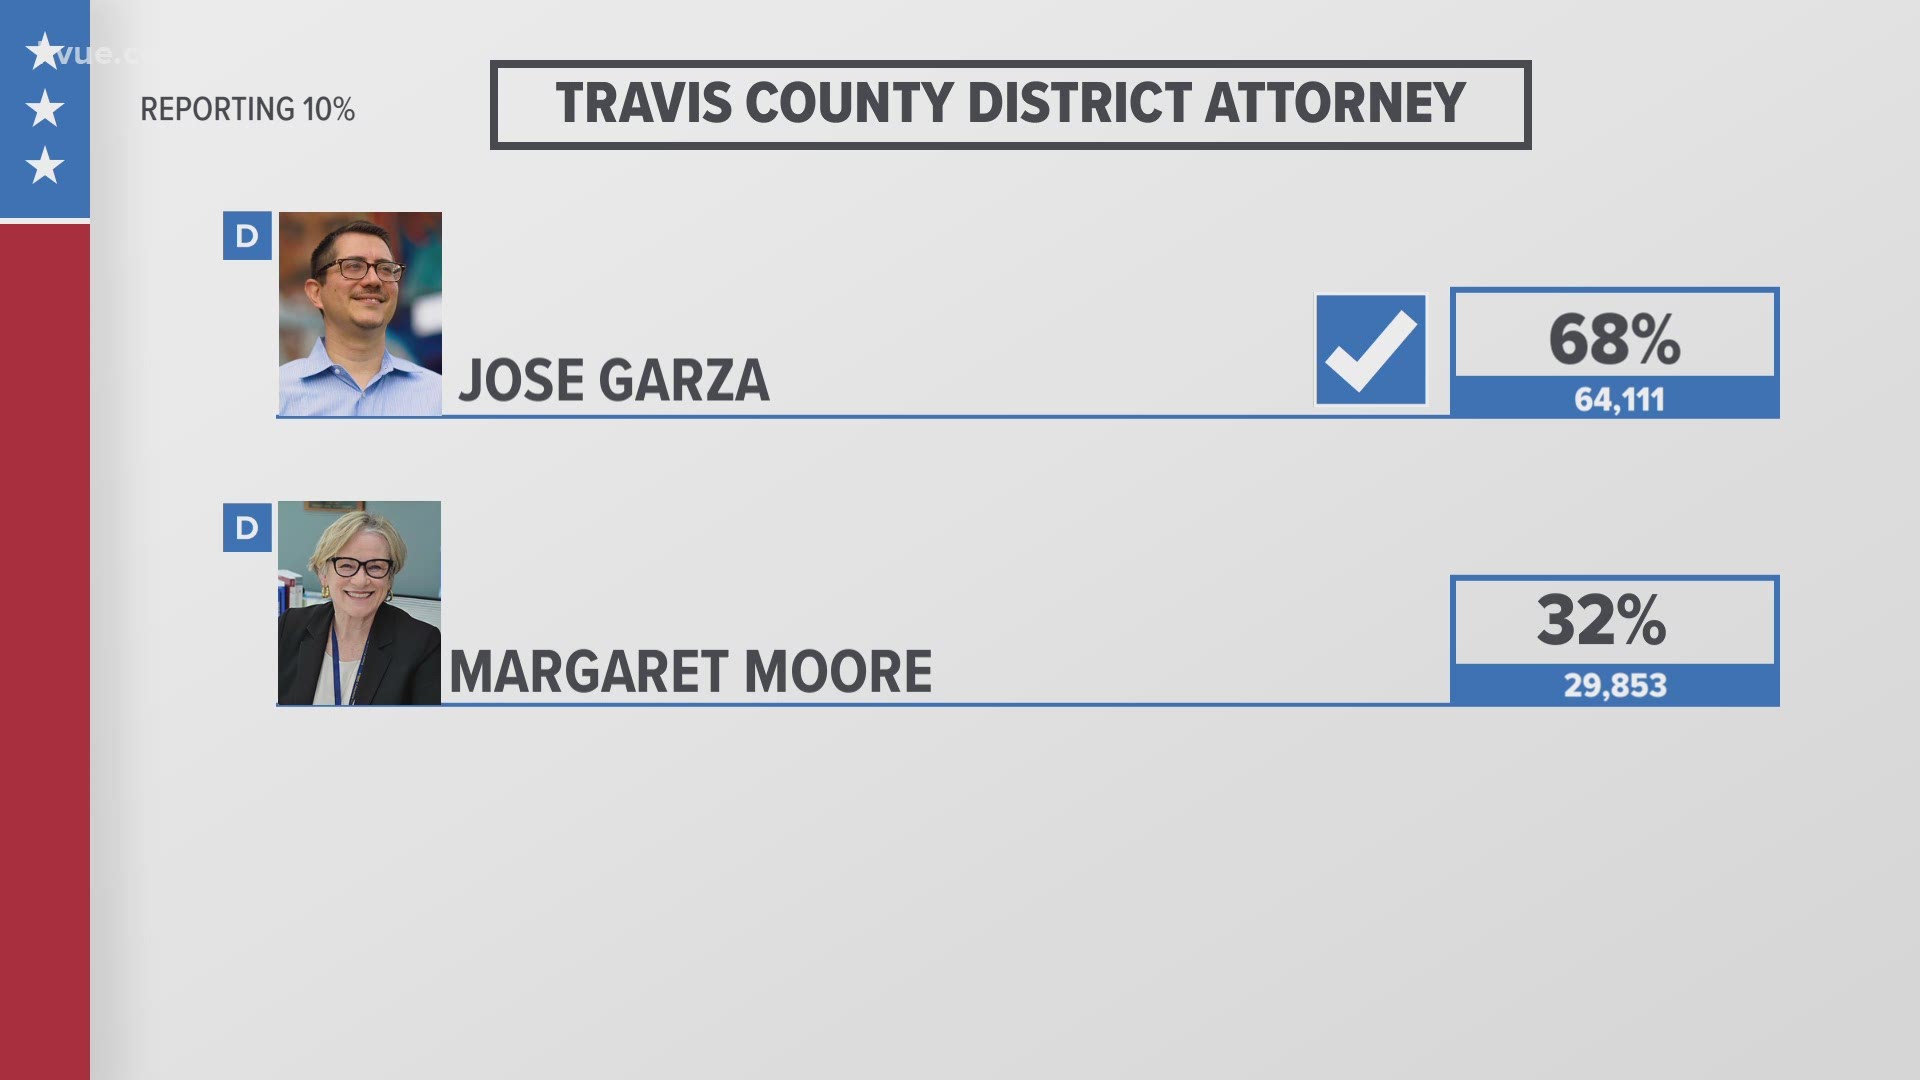 Early in the evening, incumbent Travis County District Attorney Margaret Moore conceded to Jose Garza in the Democratic primary runoff.